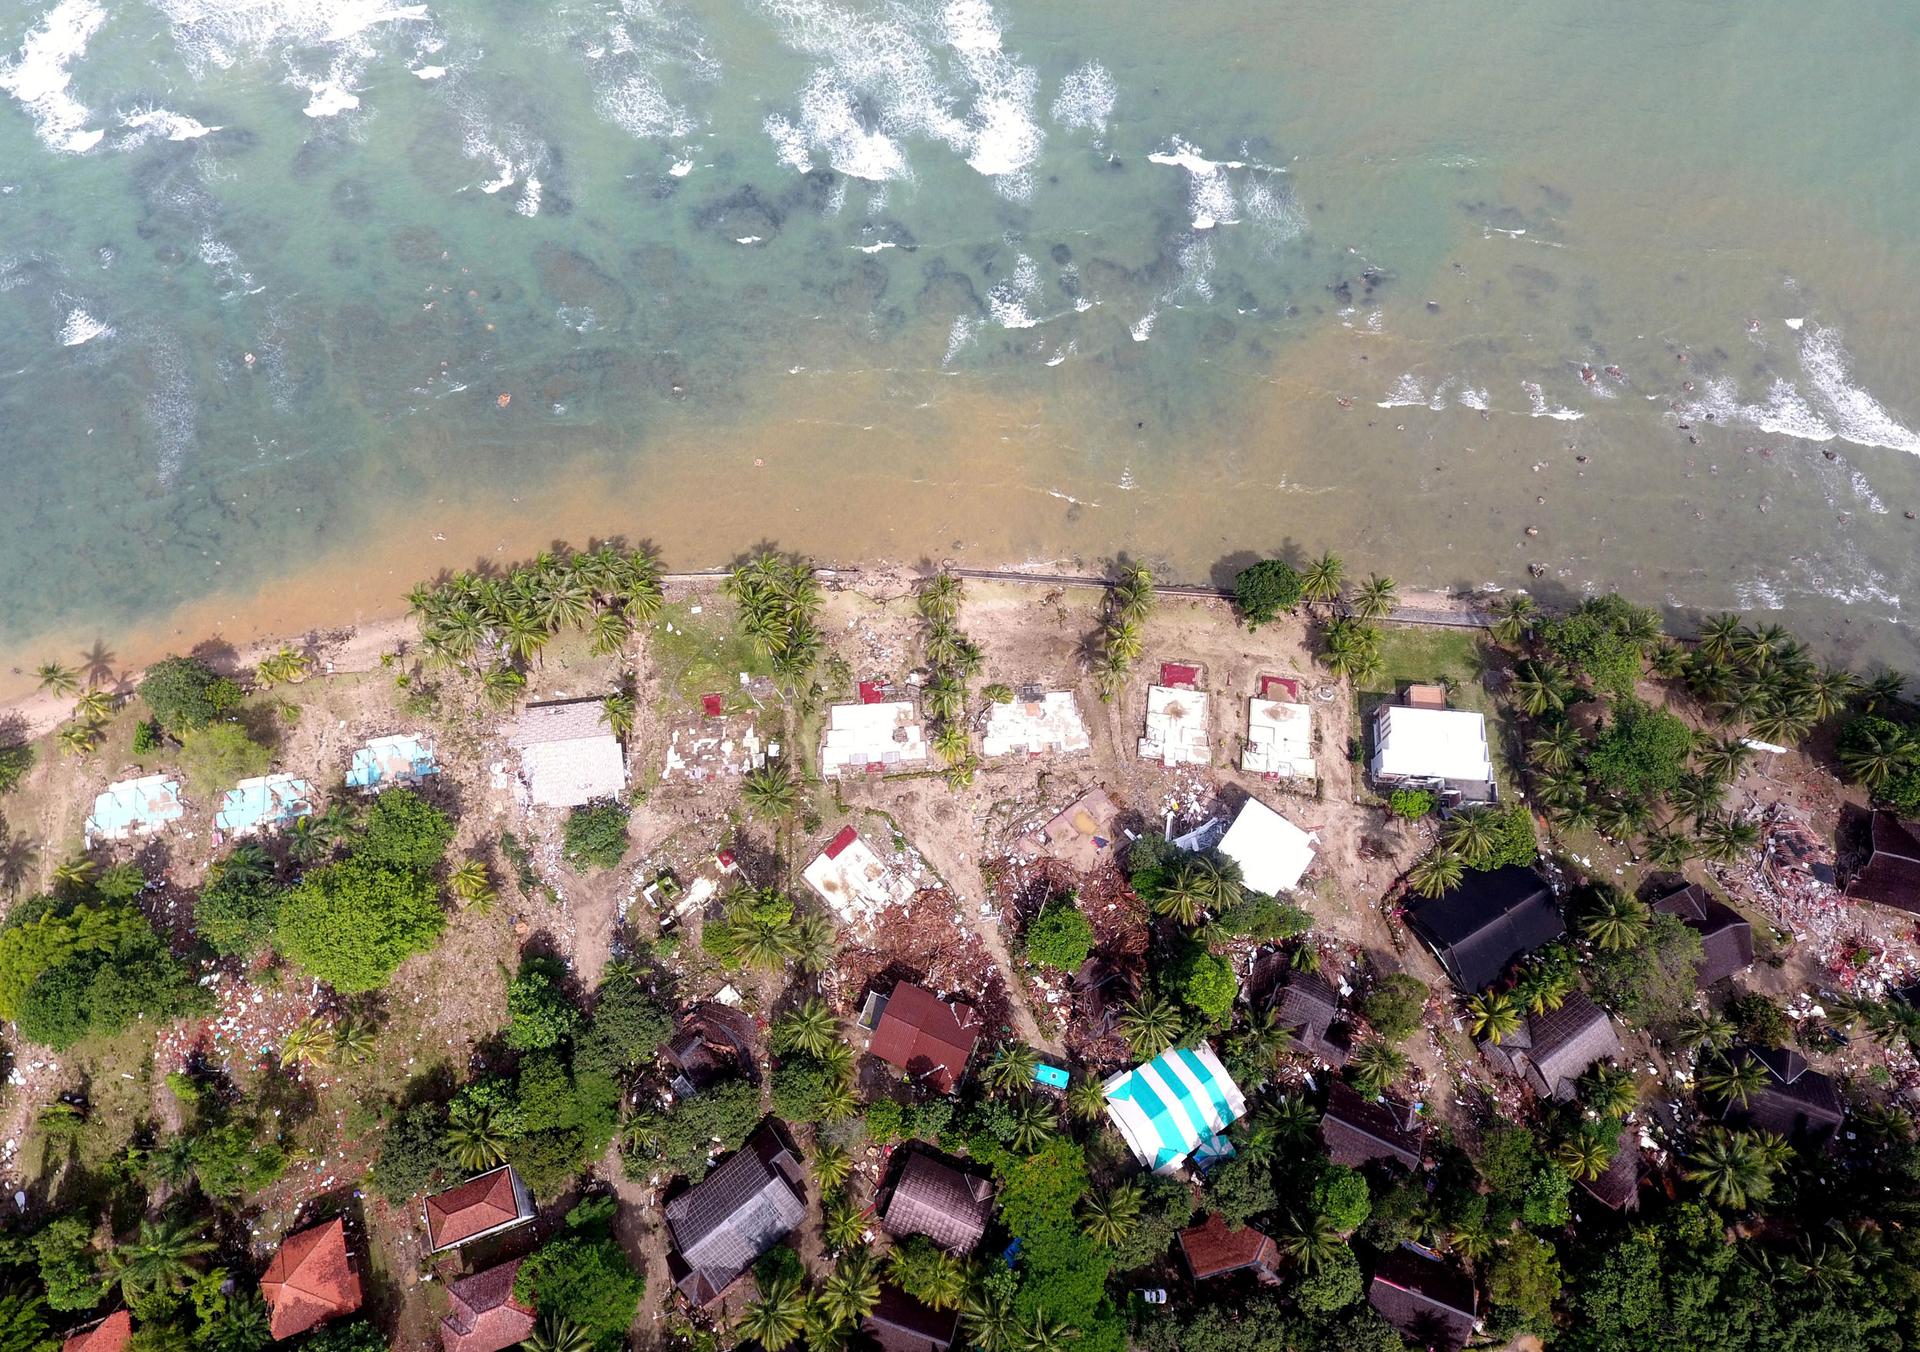 An aerial image shows buildings along a coastline. Those close to the water are destroyed.